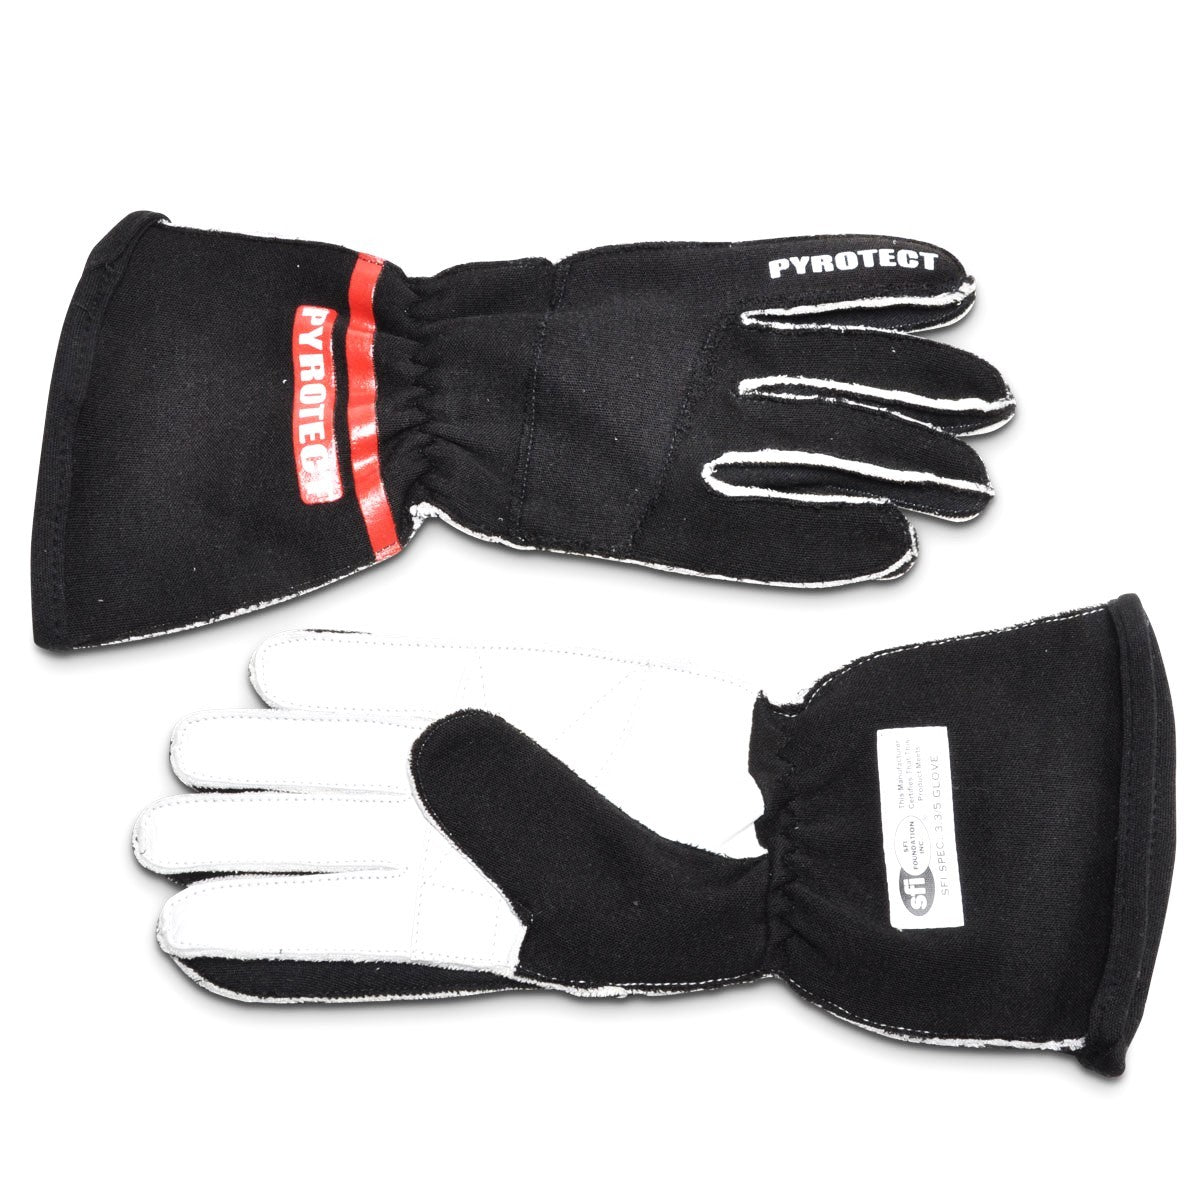 Pyrotect Glove PRO 2 Layer Black Large SFI-5 Safety Clothing Driving Gloves main image